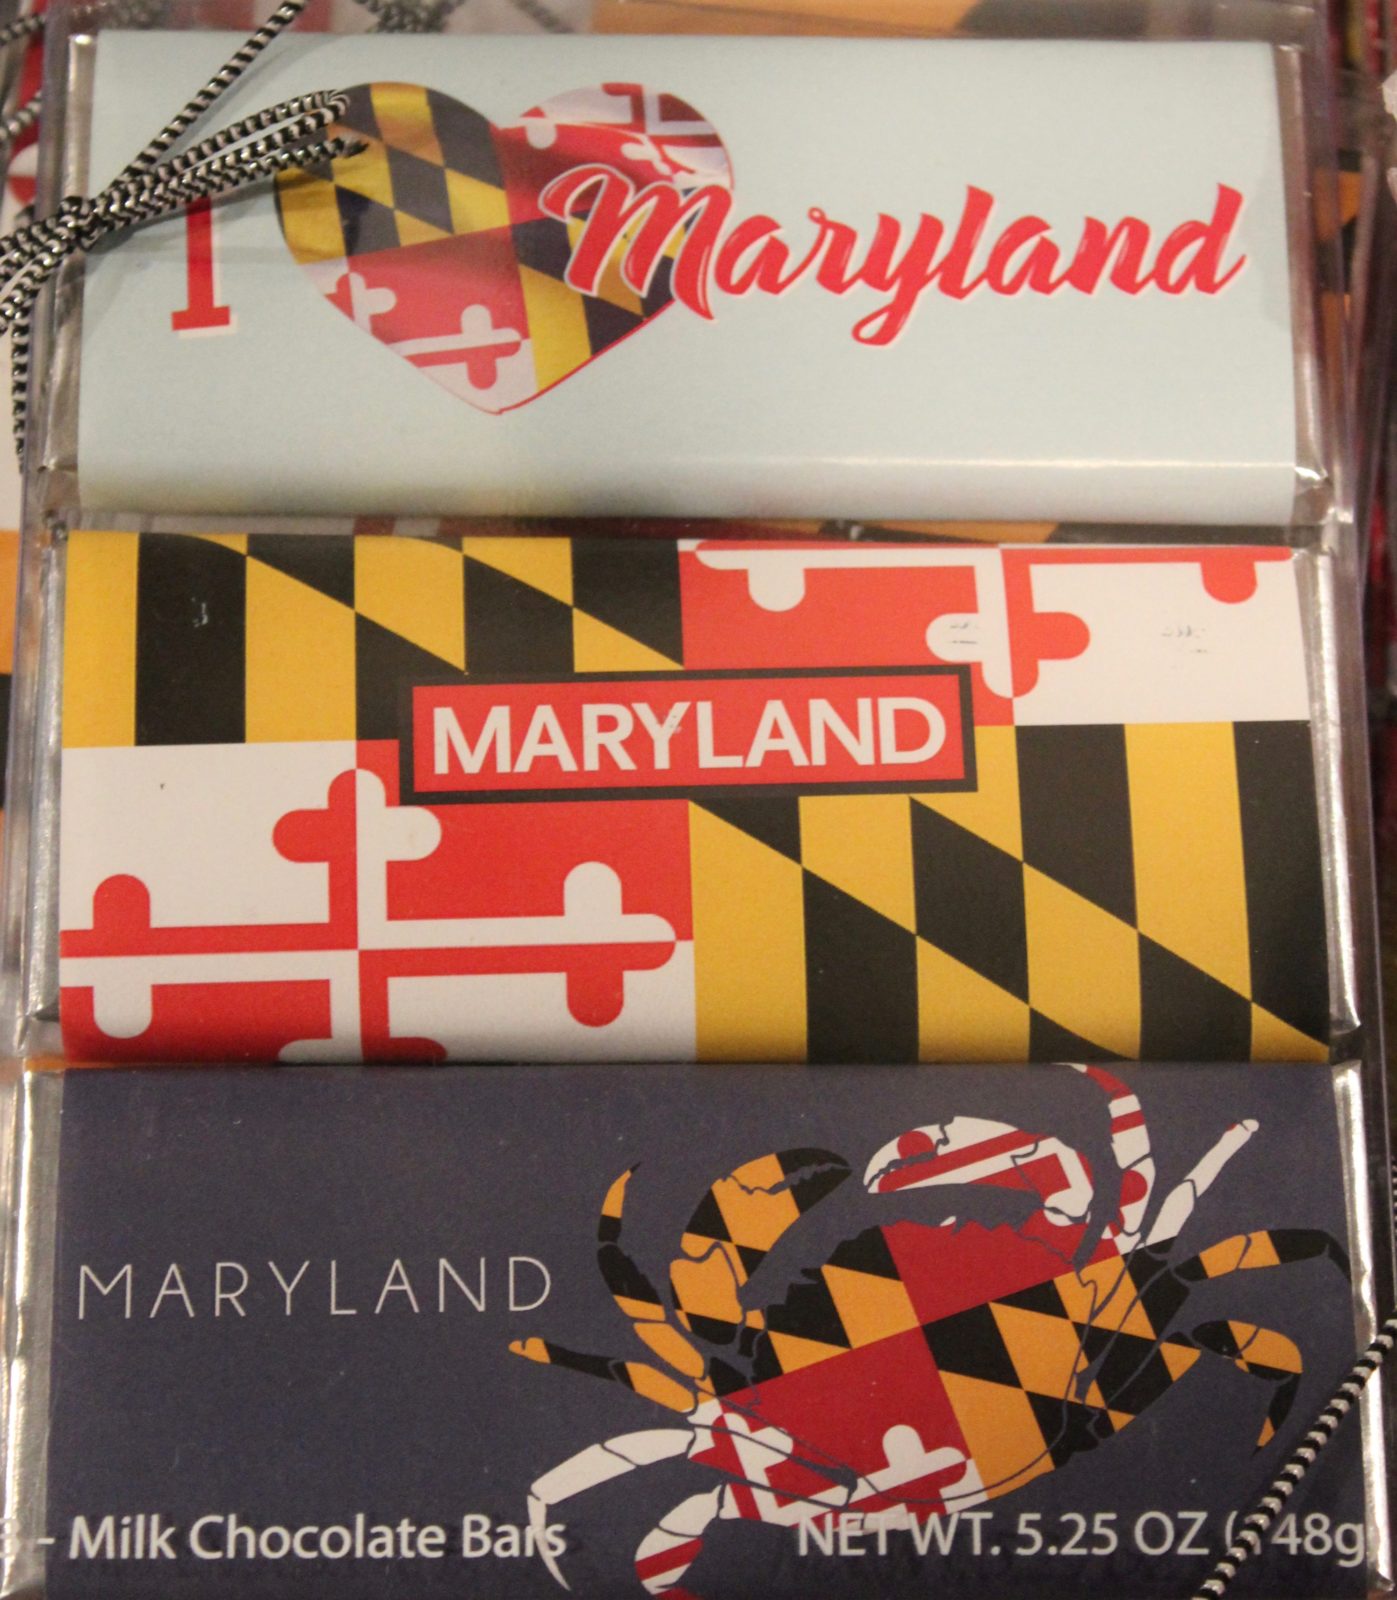 » Out of State Friends and Relatives? Send Them Maryland Gifts from EC